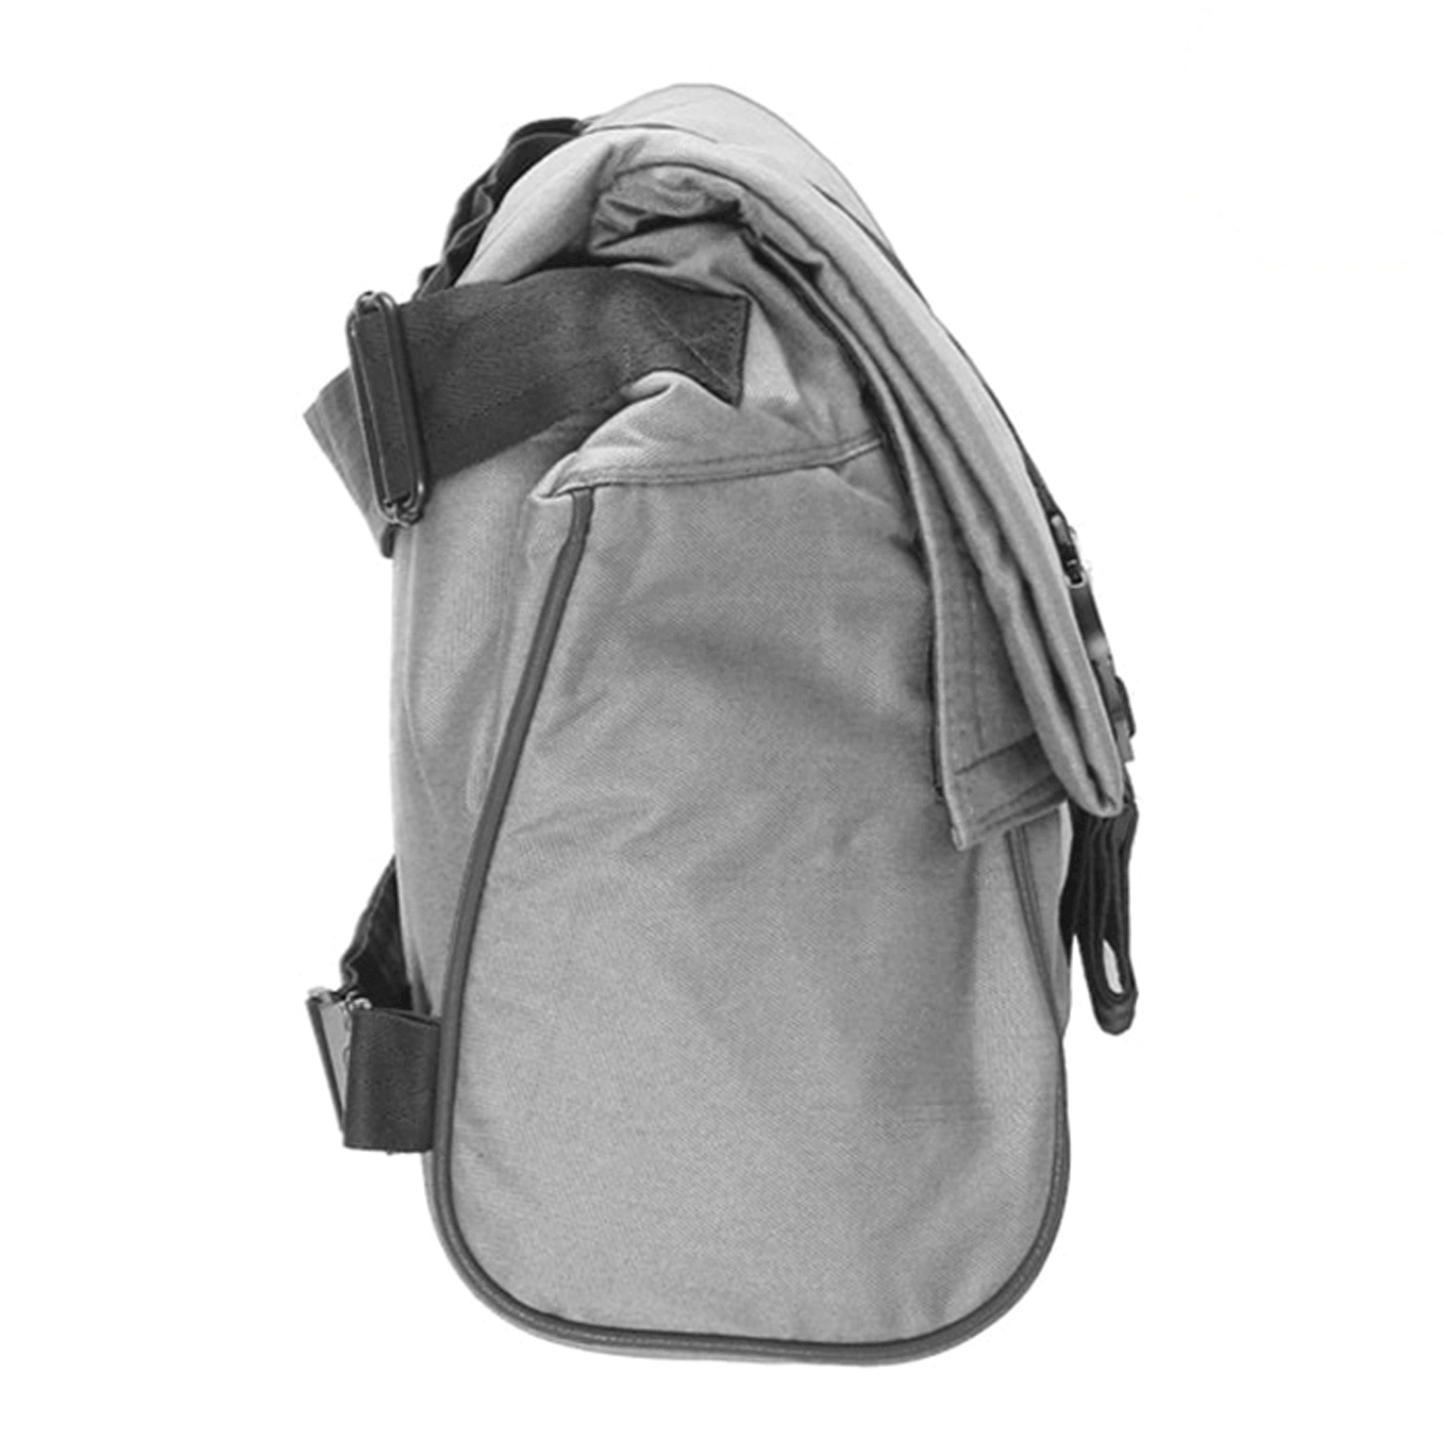 AWOL DAILY Gray Messenger Bag 886151 Harvest & Extraction 853336007898